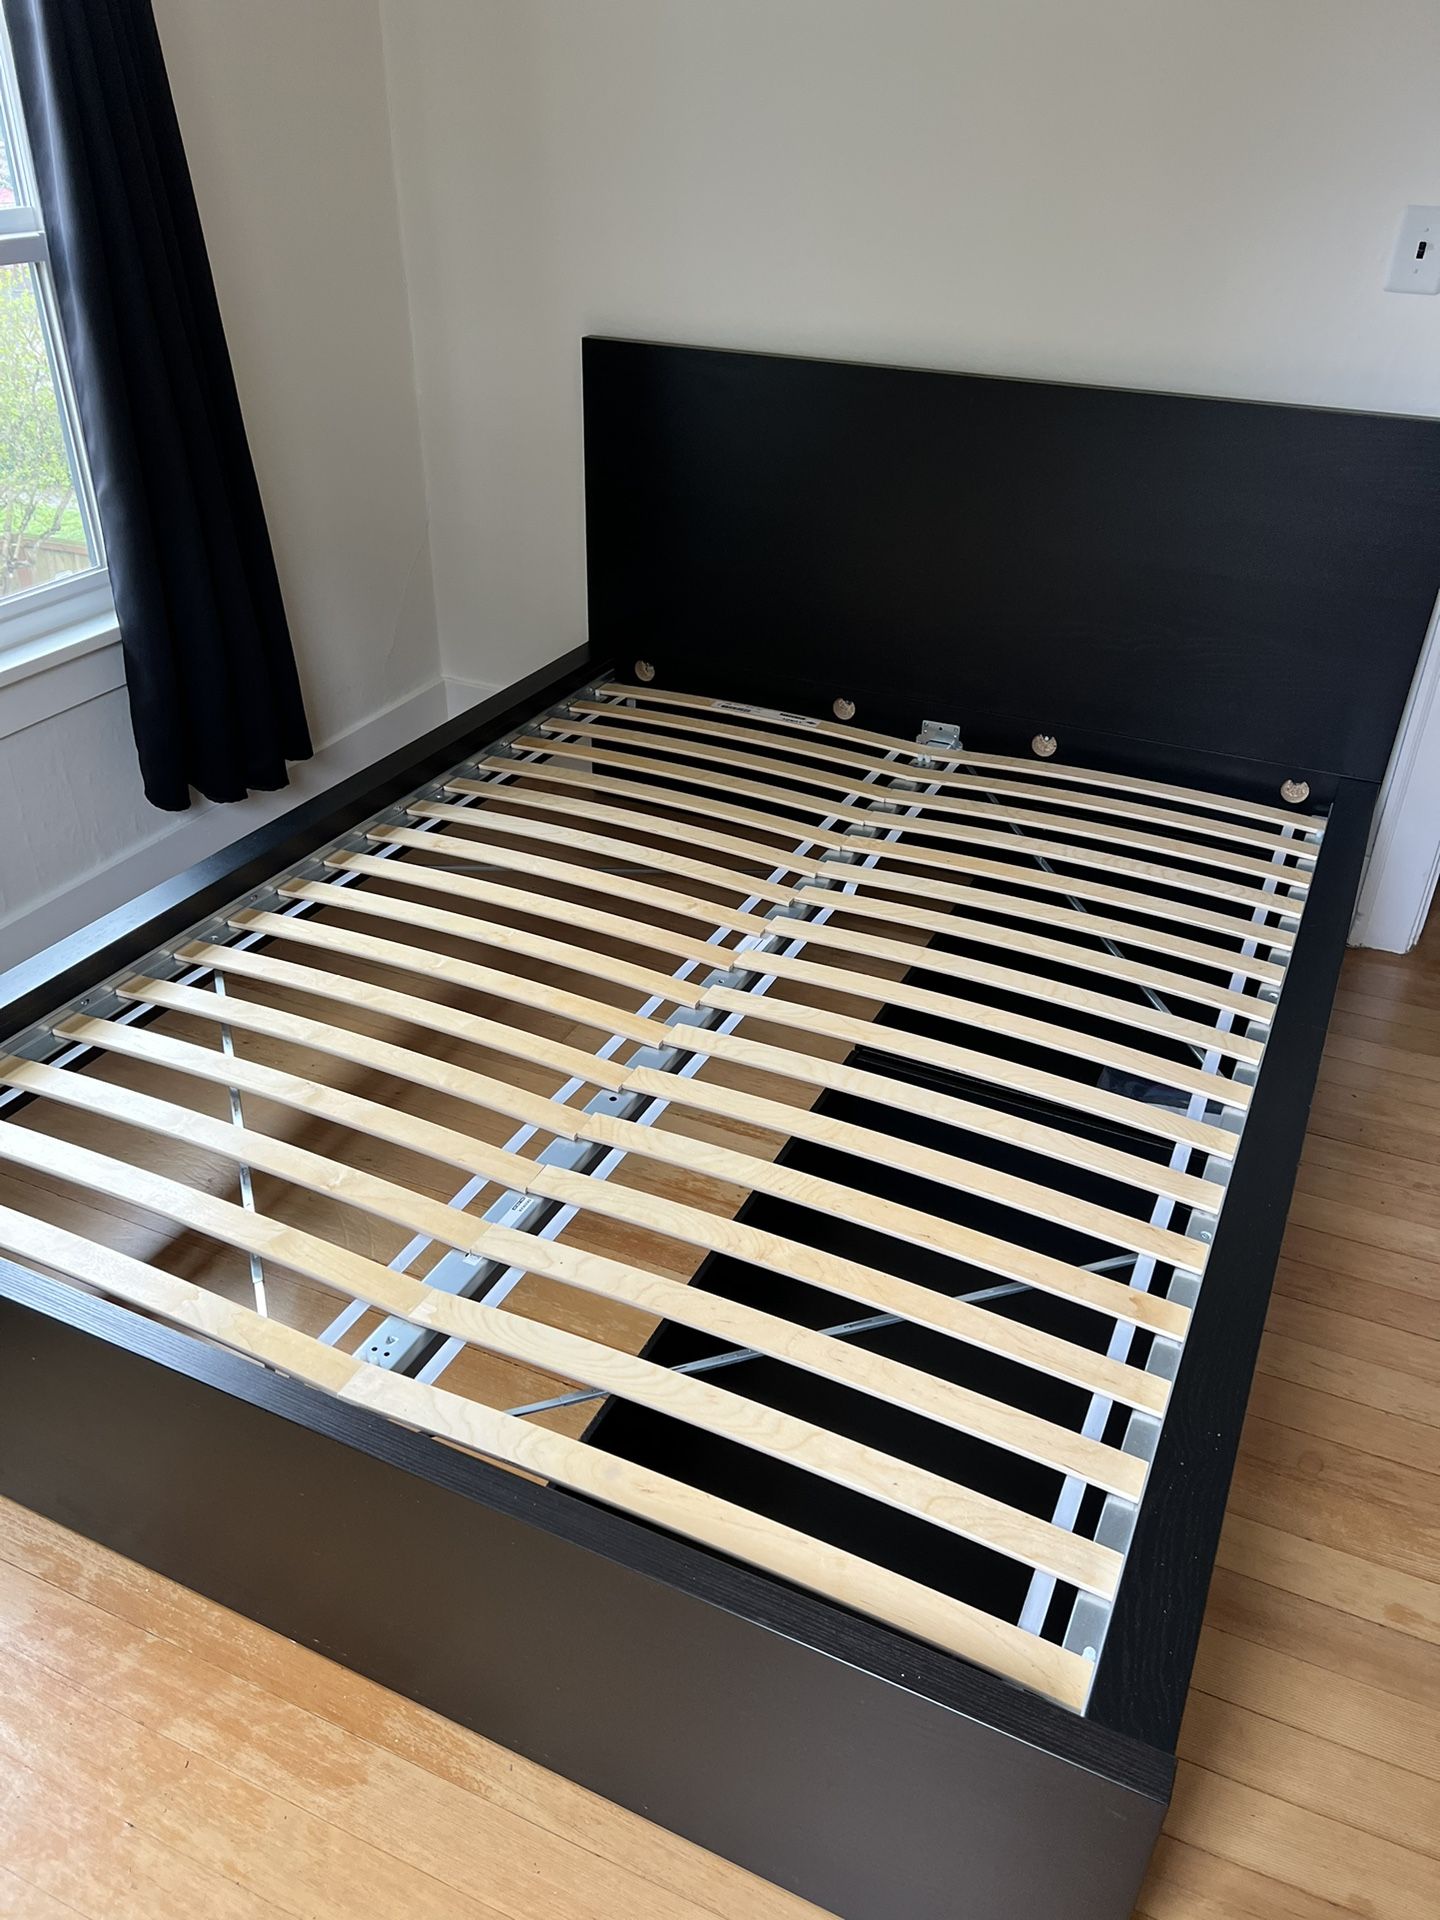 MALM Ikea Queen Bed Frame